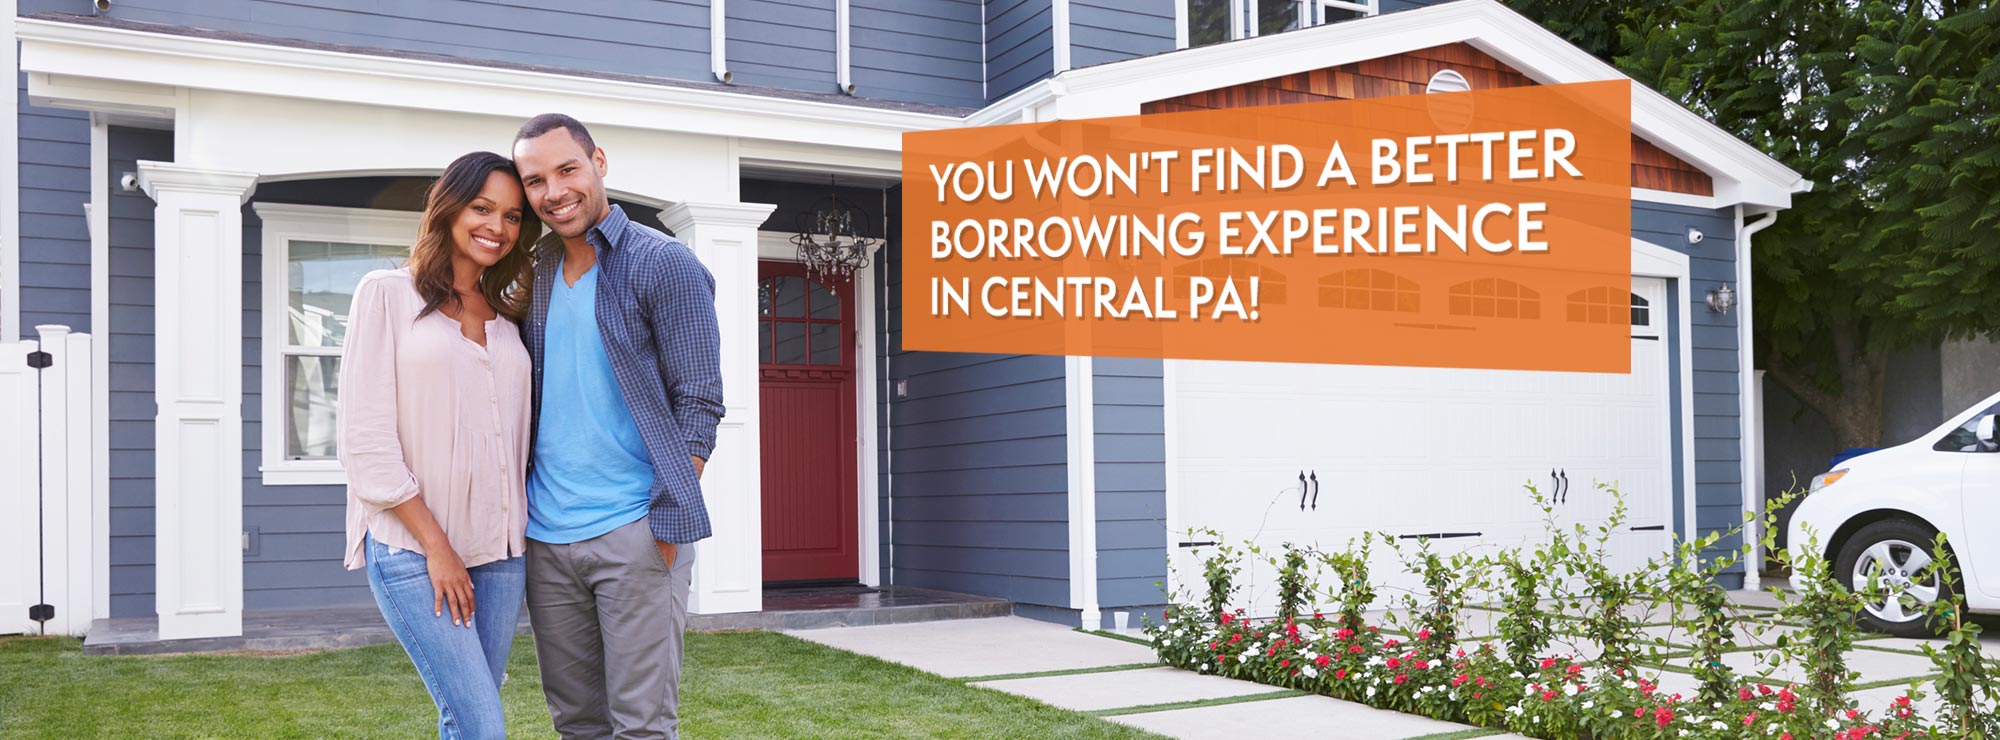 You won't find a better borrowing experience in Central PA!